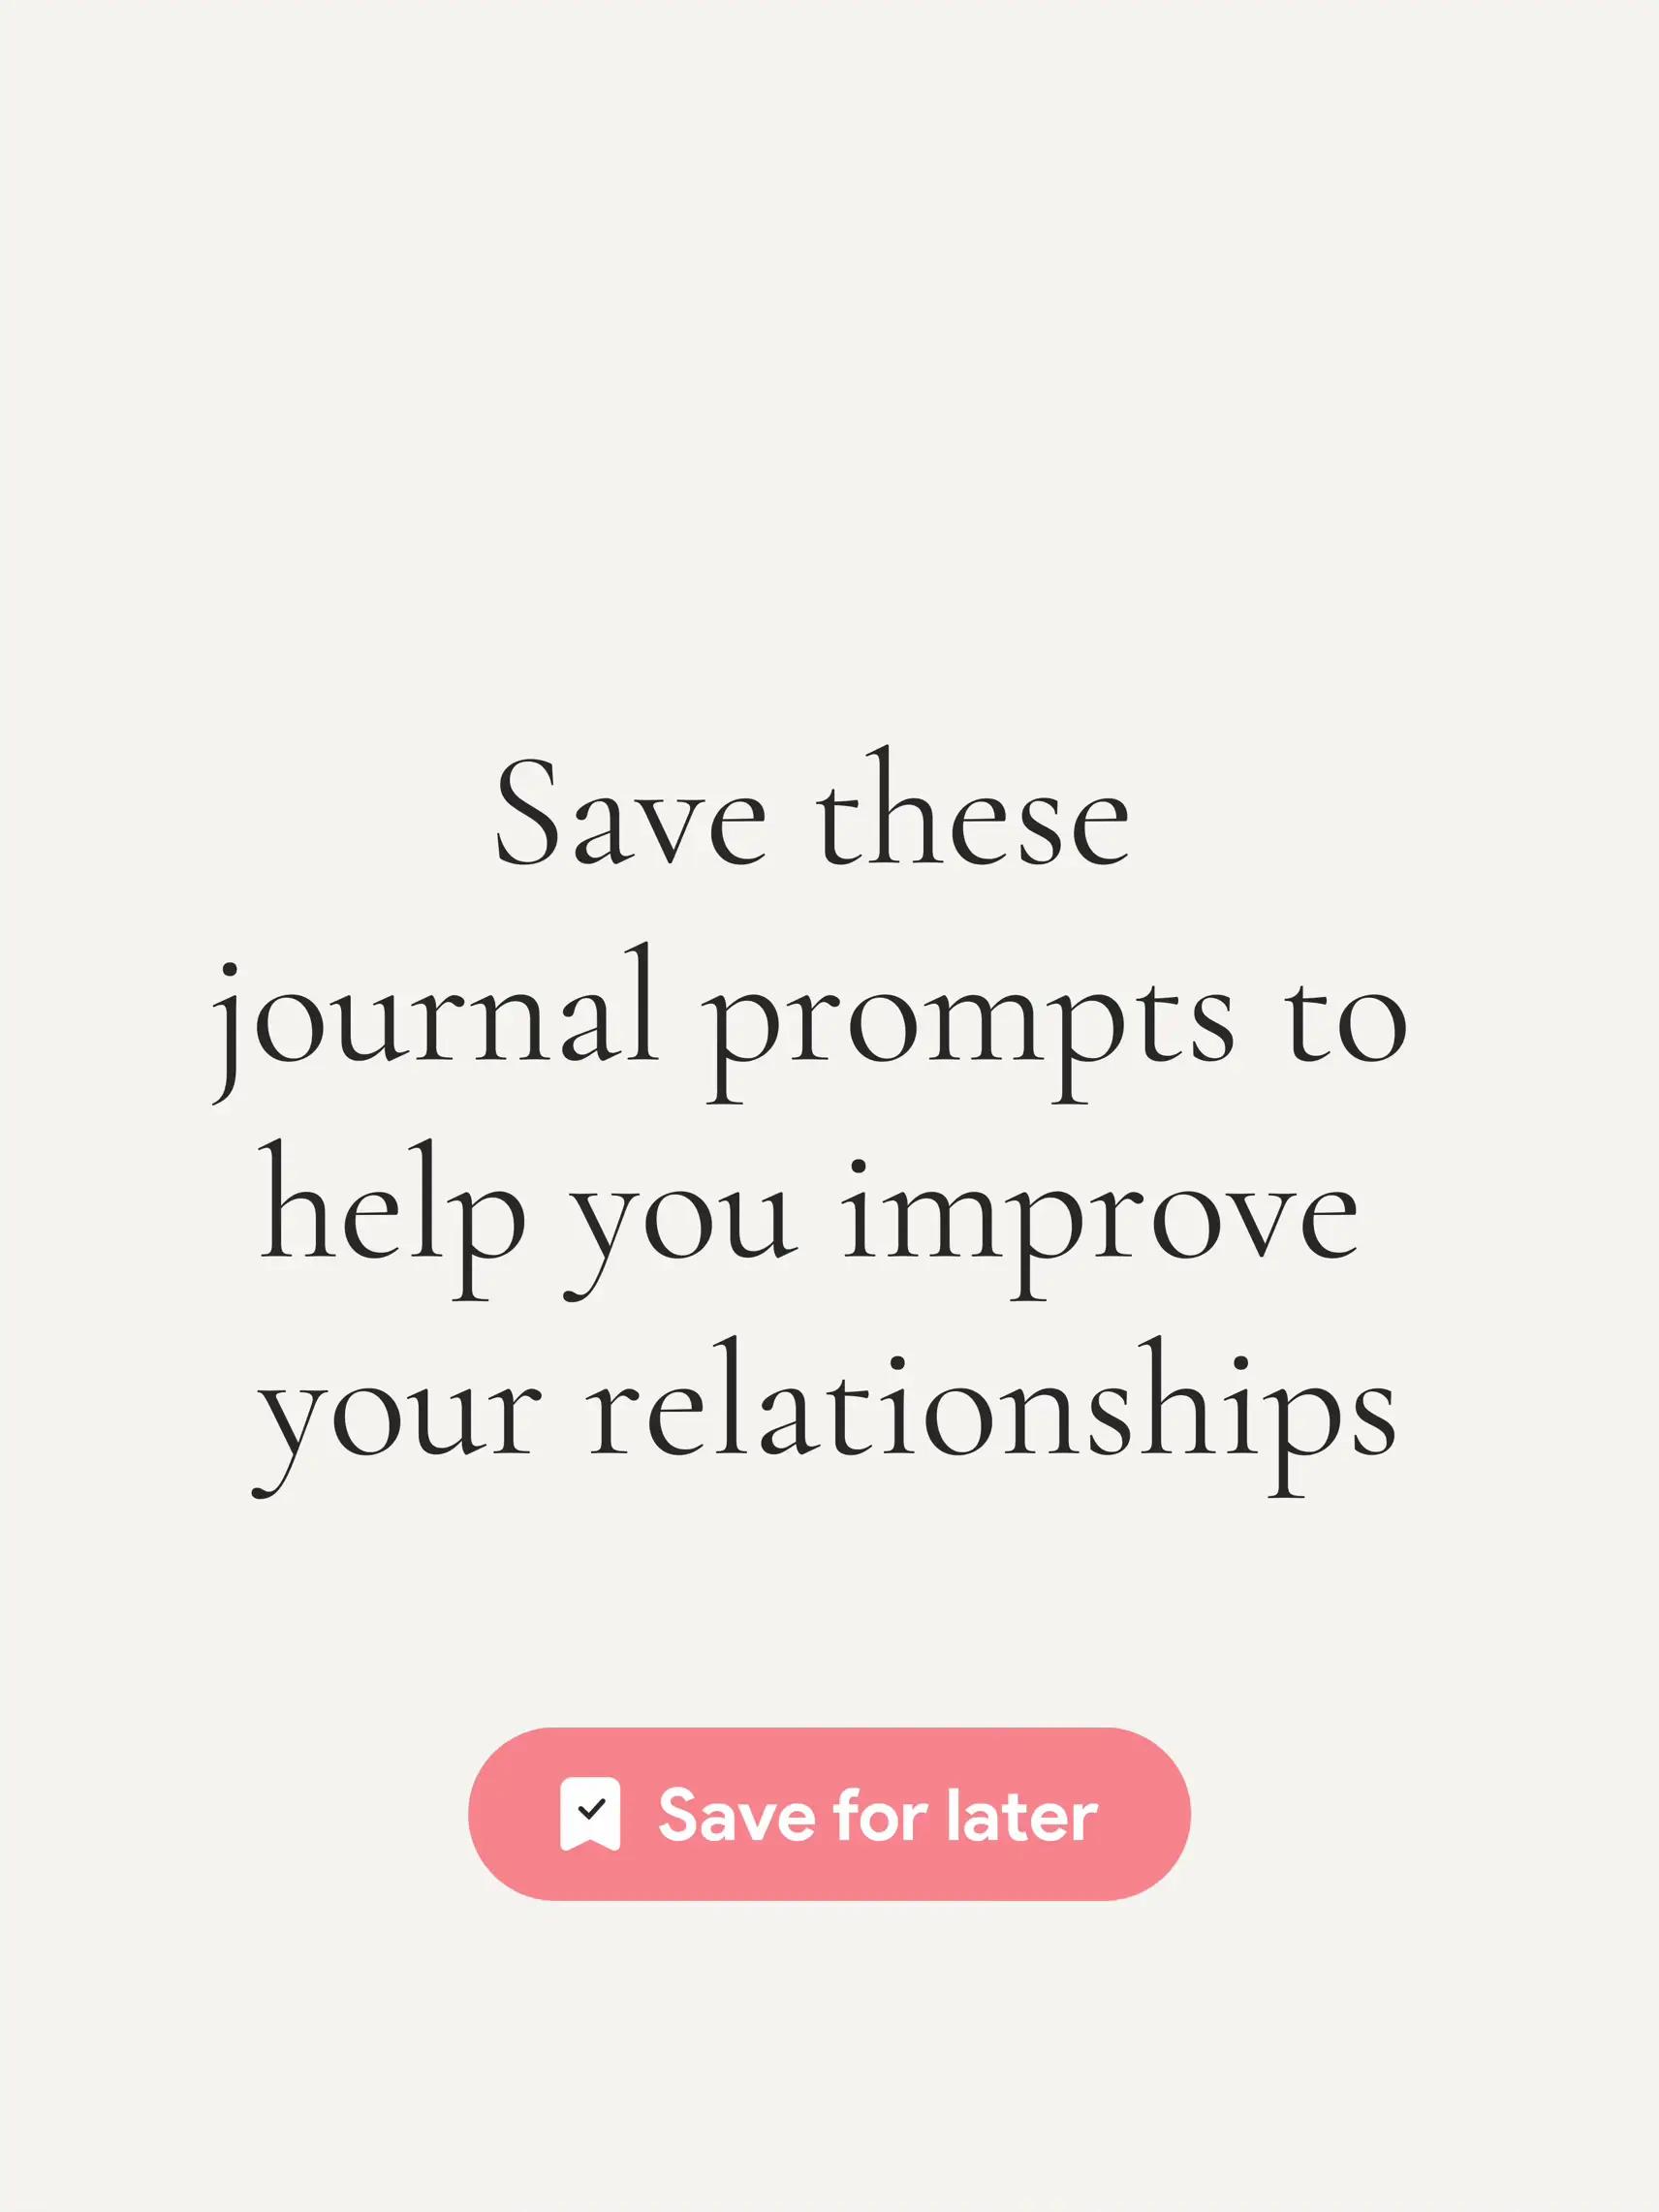 I bought the viral self-help journal from tiktok…